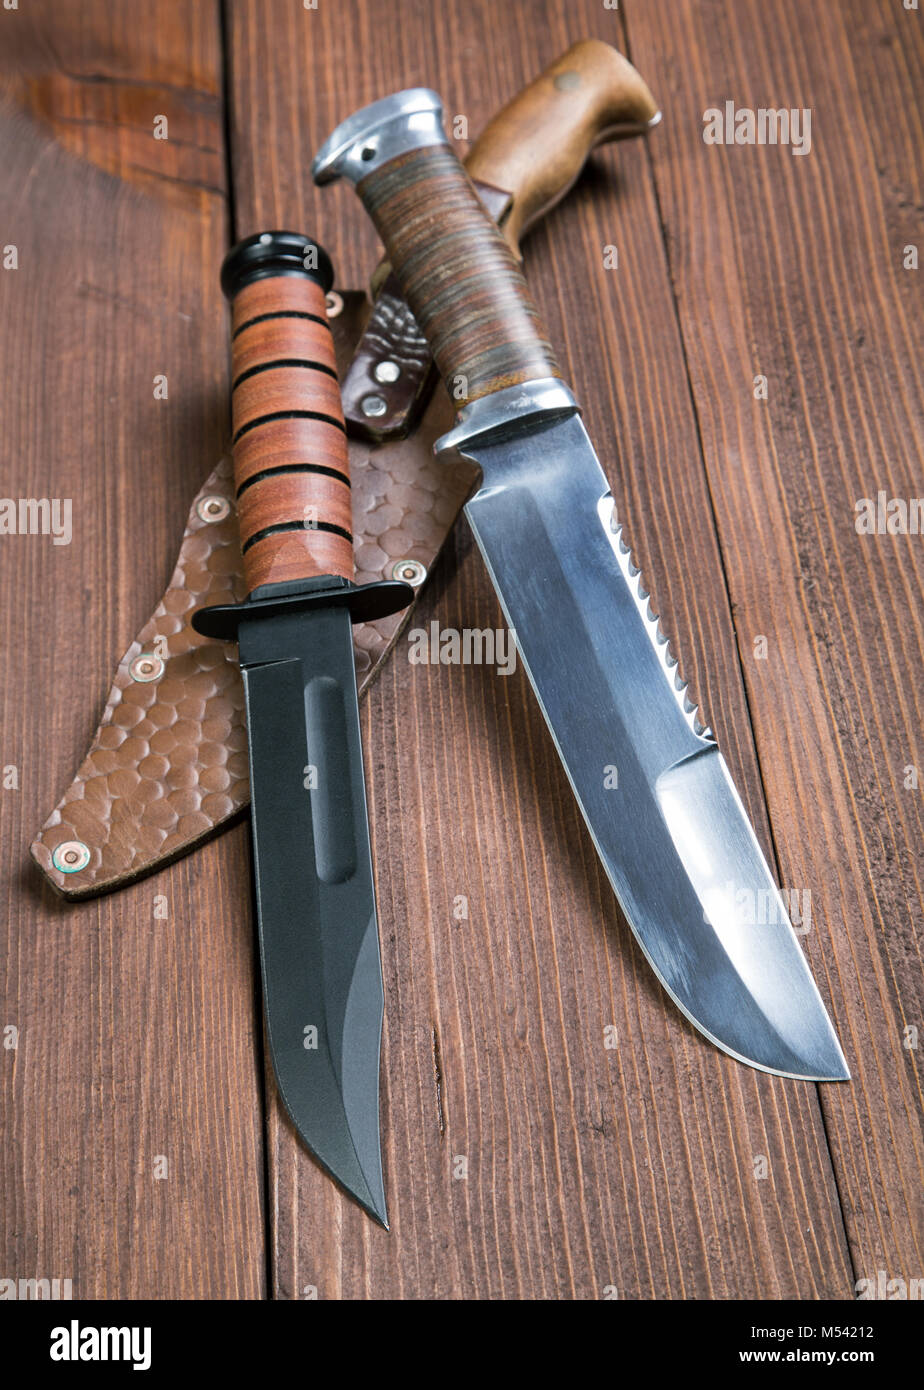 Knives with large blades on the table close-up Stock Photo